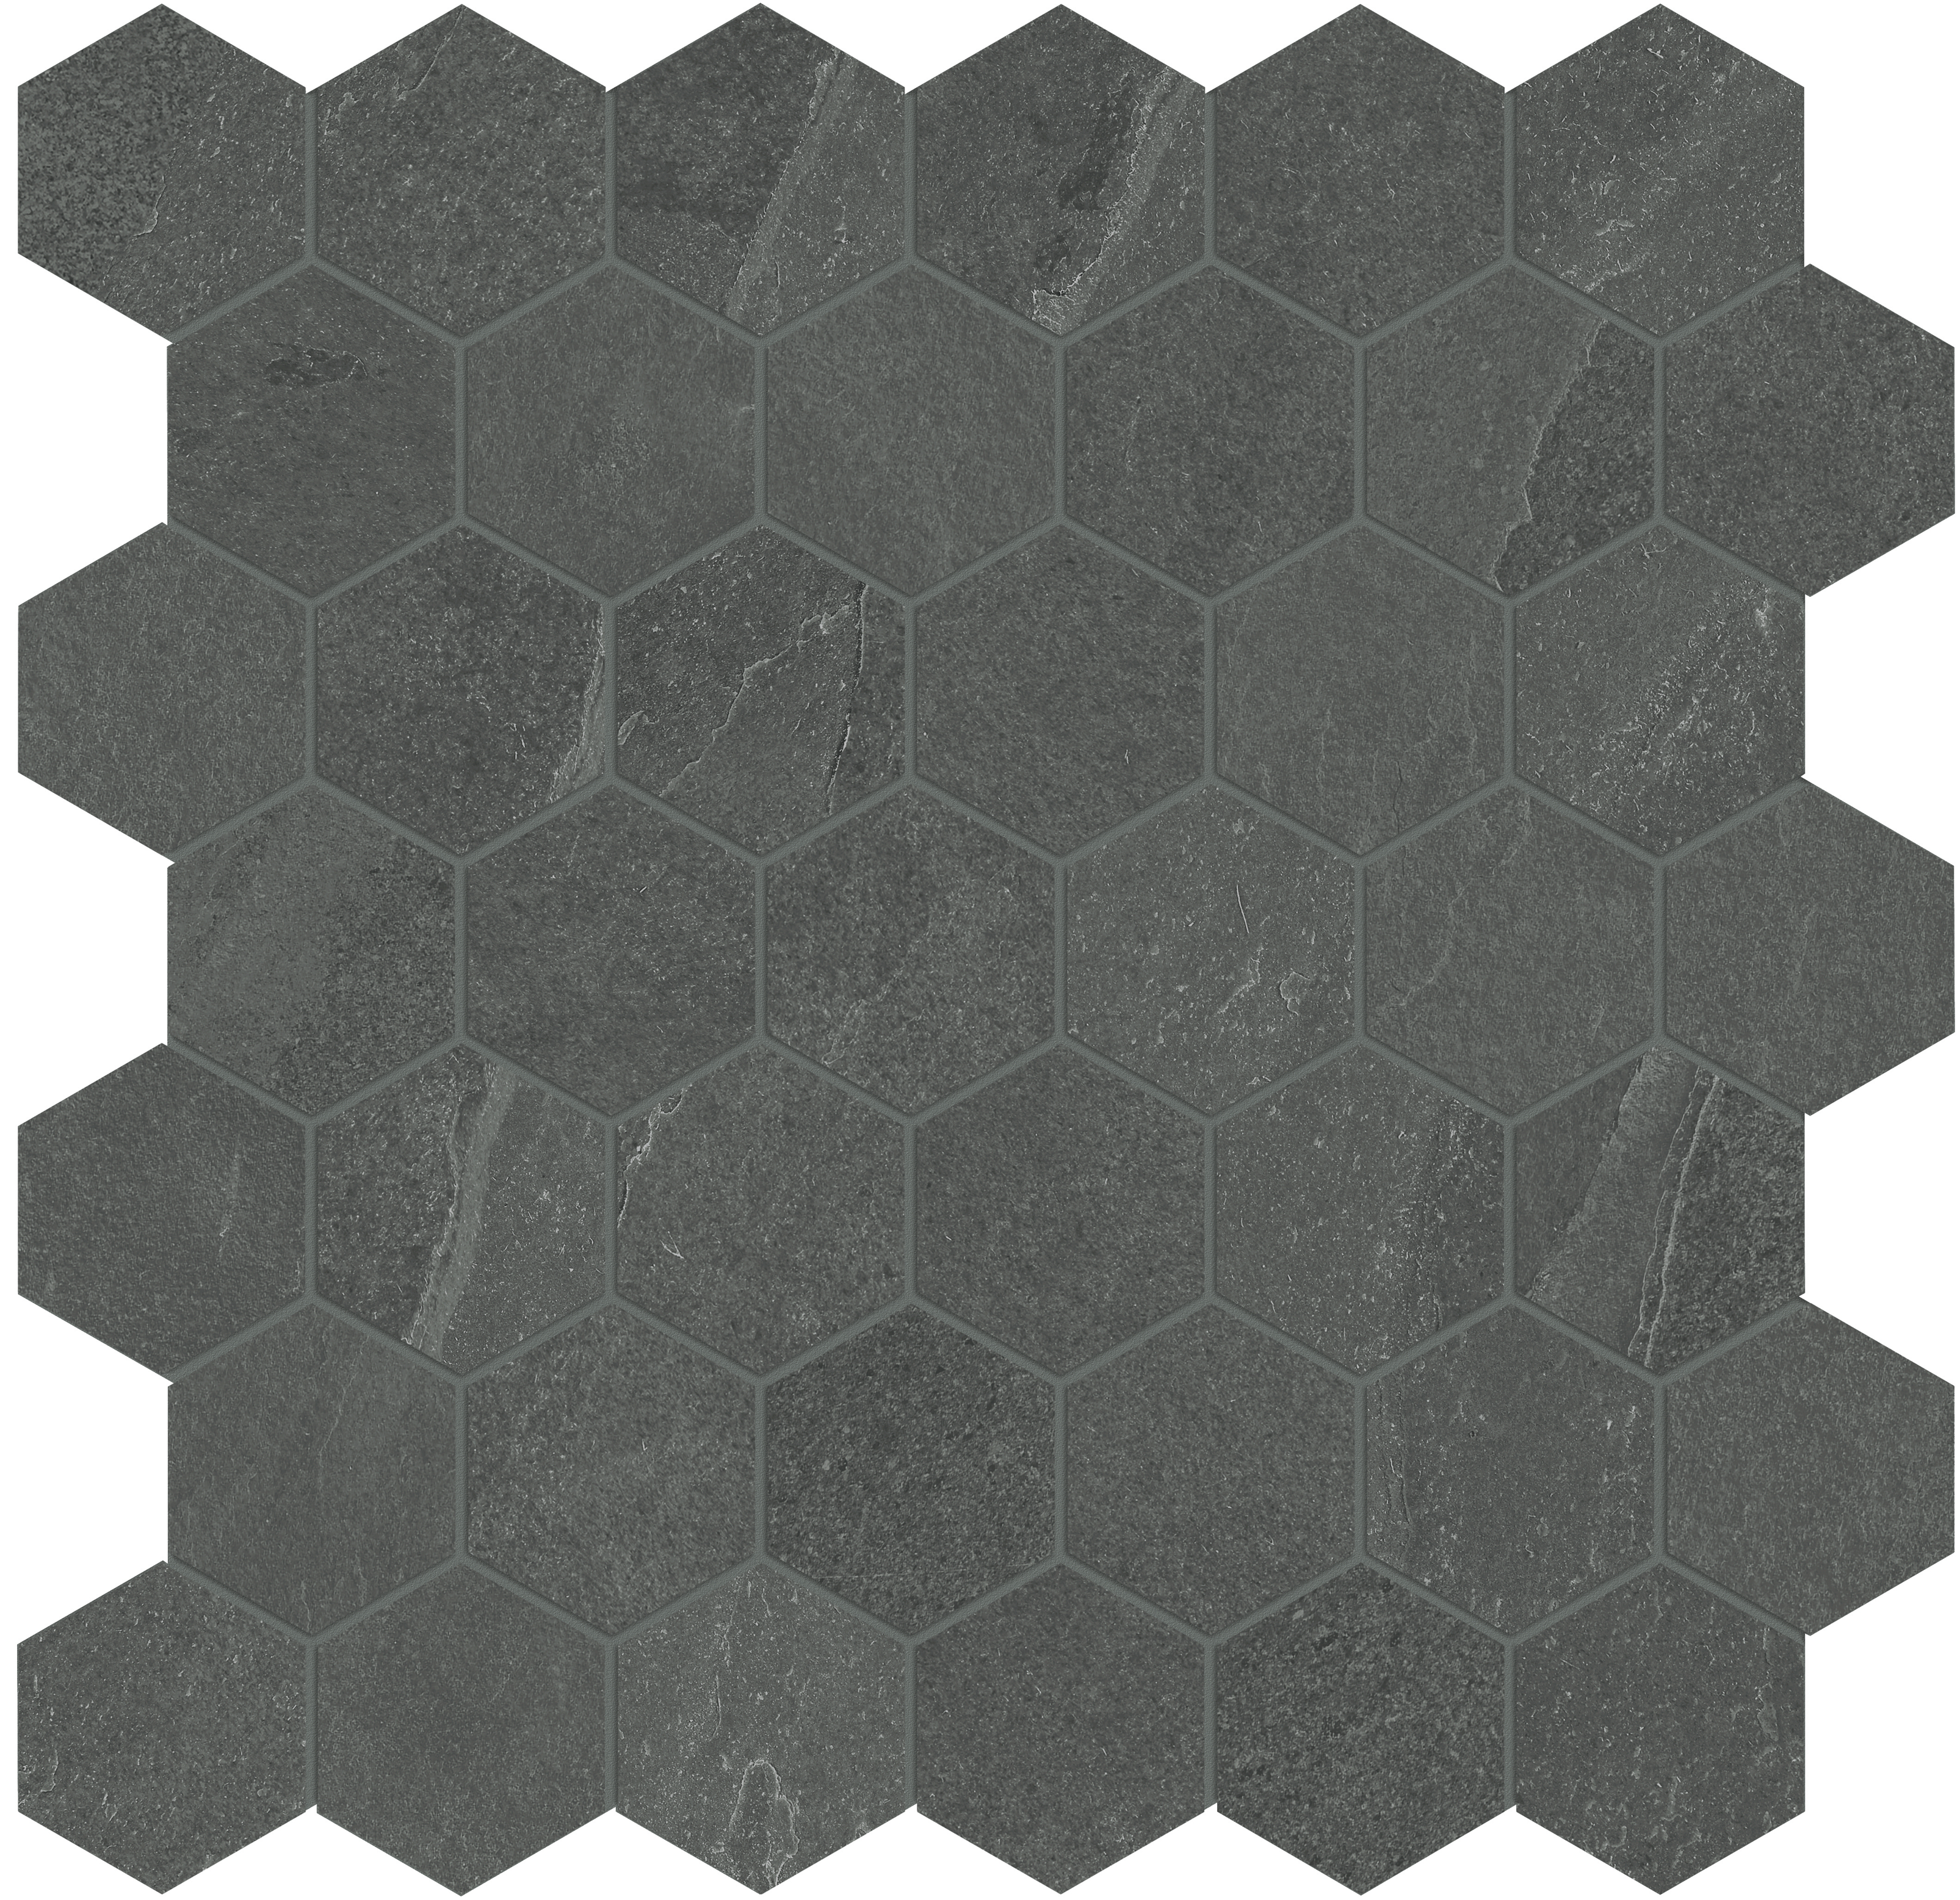 carbon hexagon 2-inch pattern color body porcelain mosaic from nord anatolia collection distributed by surface group international matte finish straight edge edge mesh shape